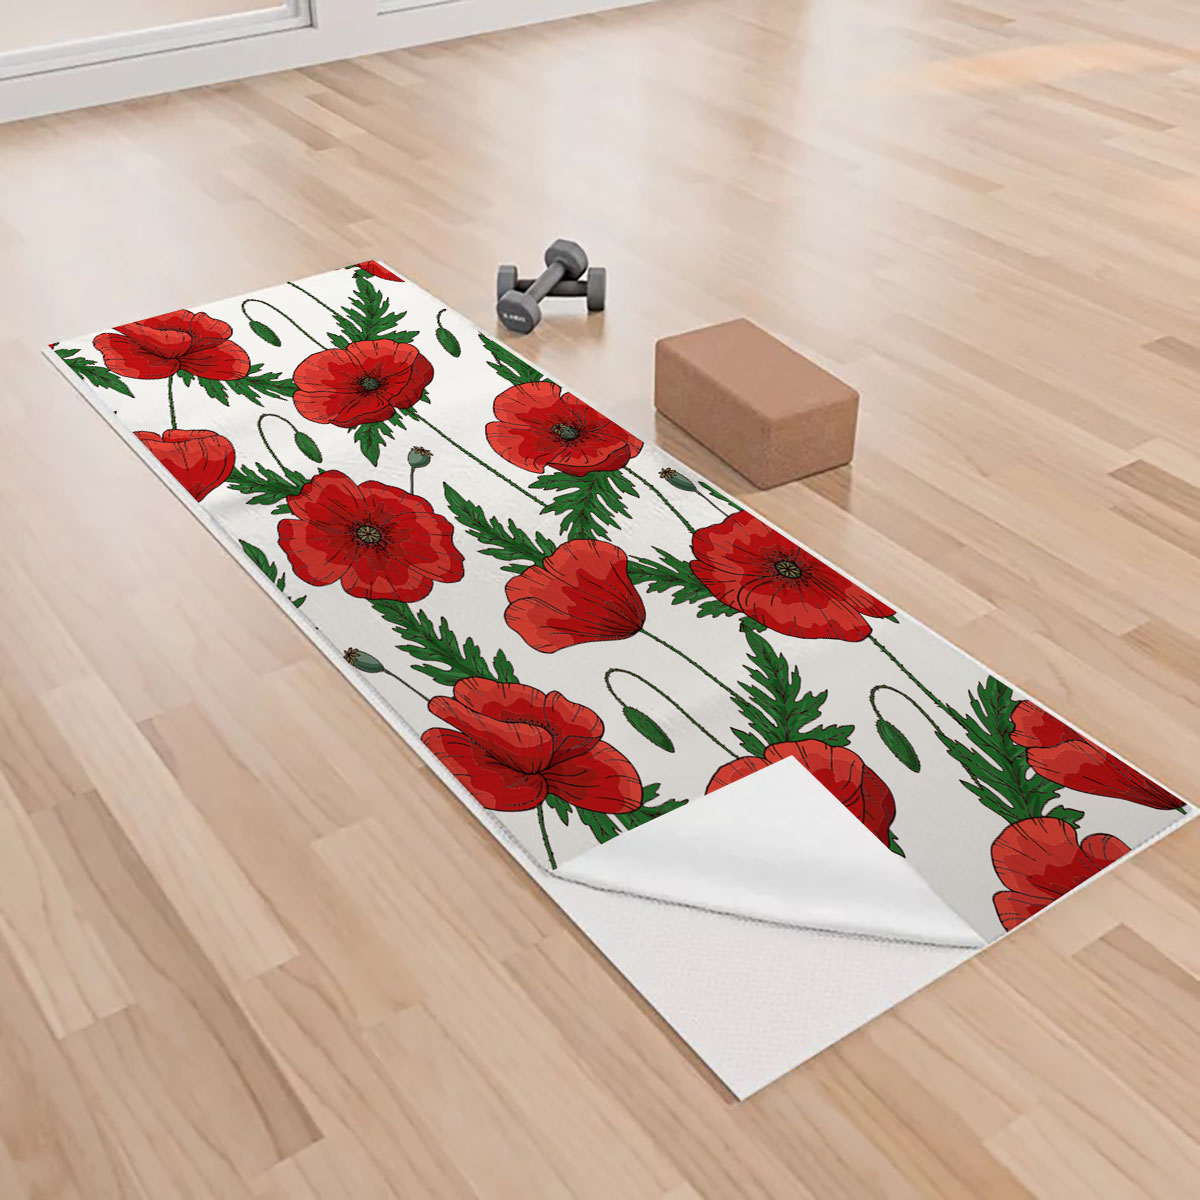 Red Poppies Flower Yoga Towels